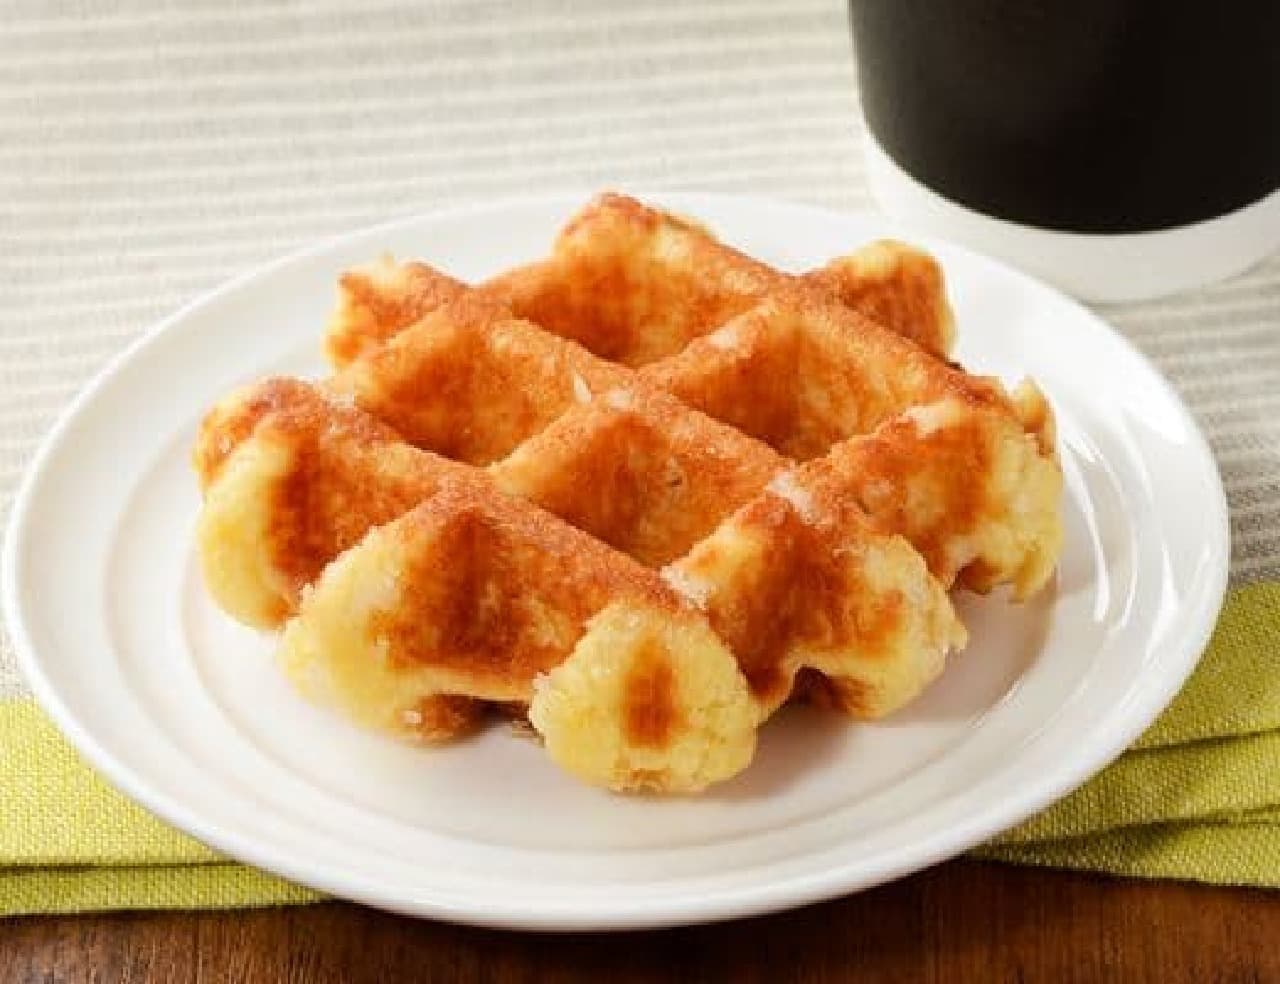 Lawson "One Belgian waffle with a crispy texture"